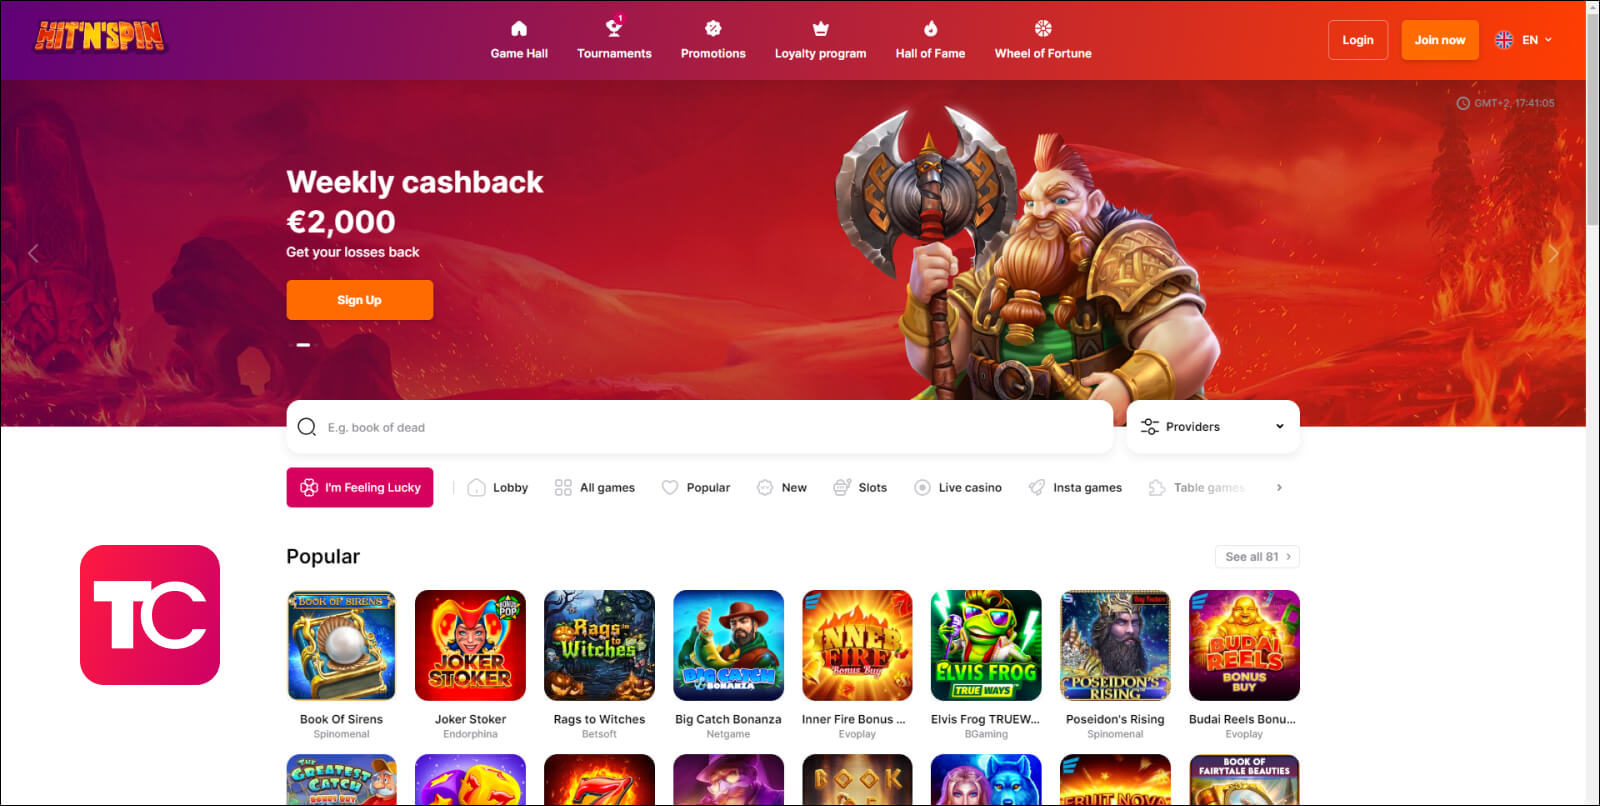 hit'n'spin casino review topcasinos